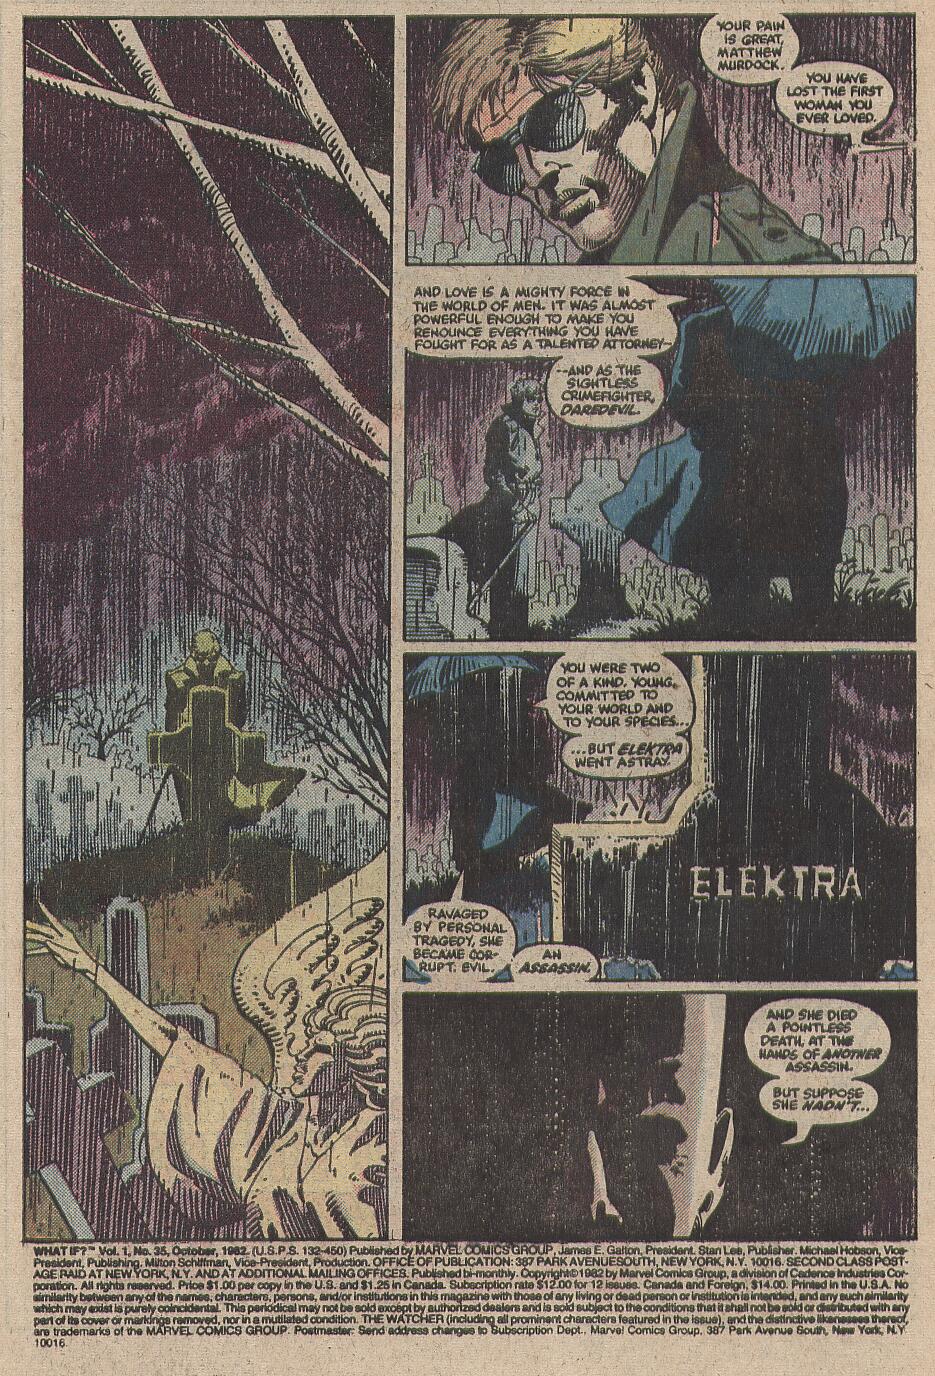 What If? (1977) issue 35 - Elektra had lived - Page 2